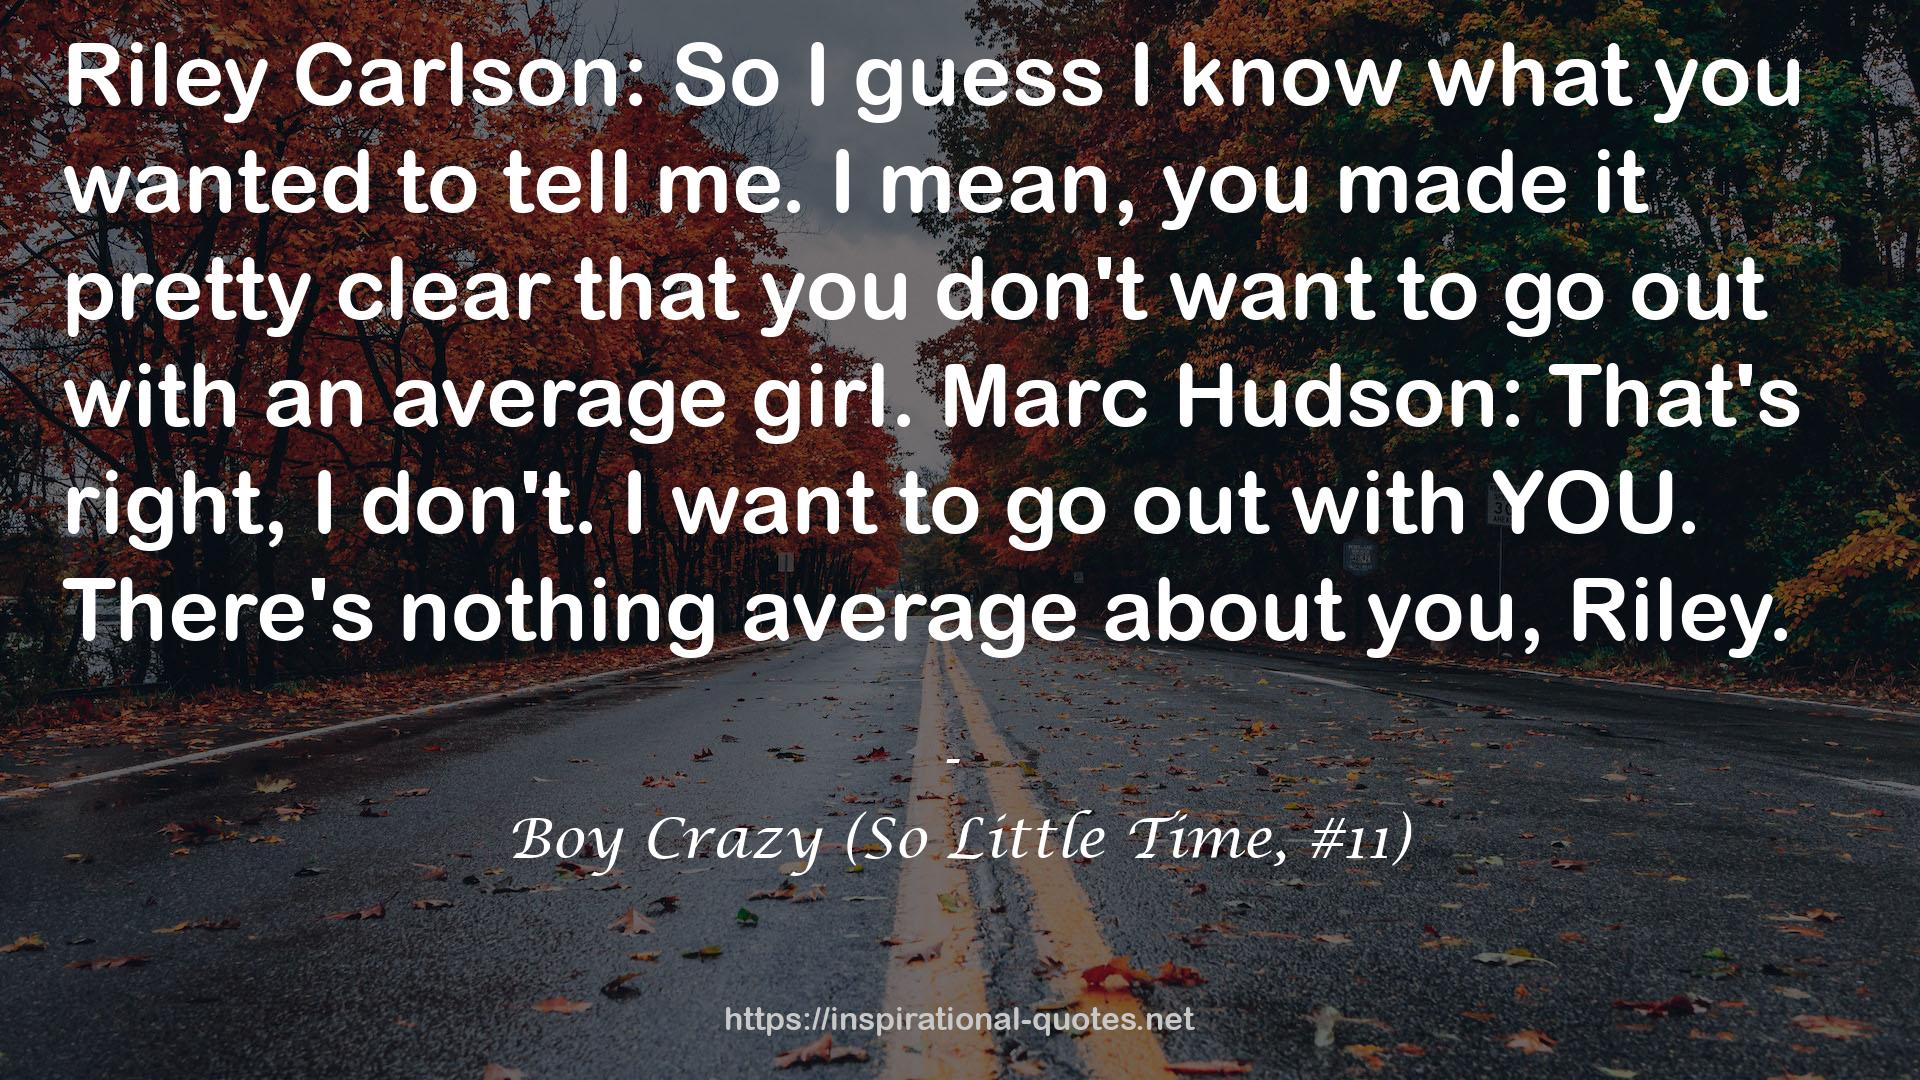 Boy Crazy (So Little Time, #11) QUOTES